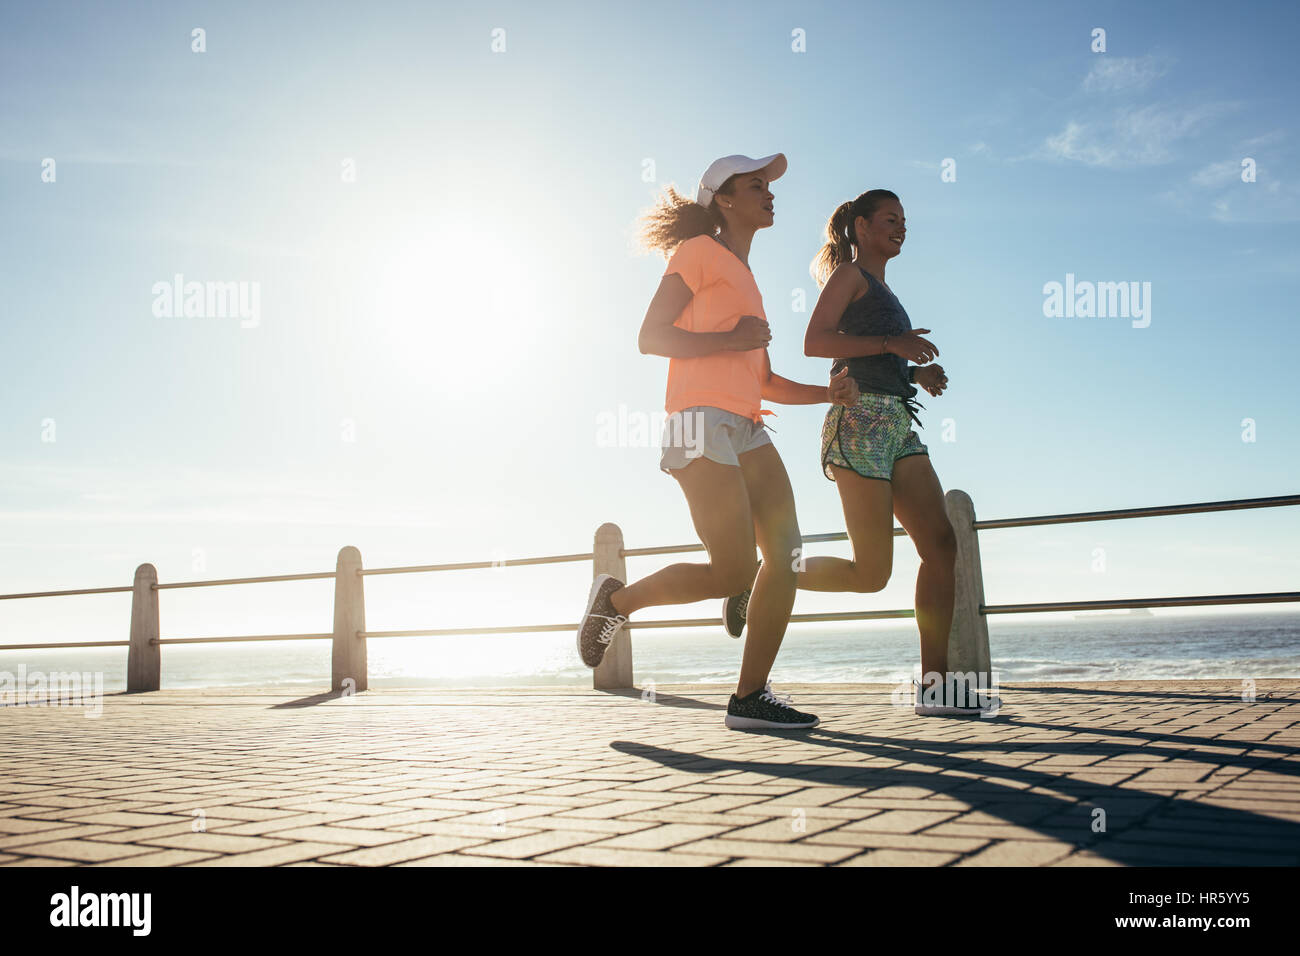 Low angle shot of two young women running on ocean front. Female runner working out on a sunny day. Stock Photo